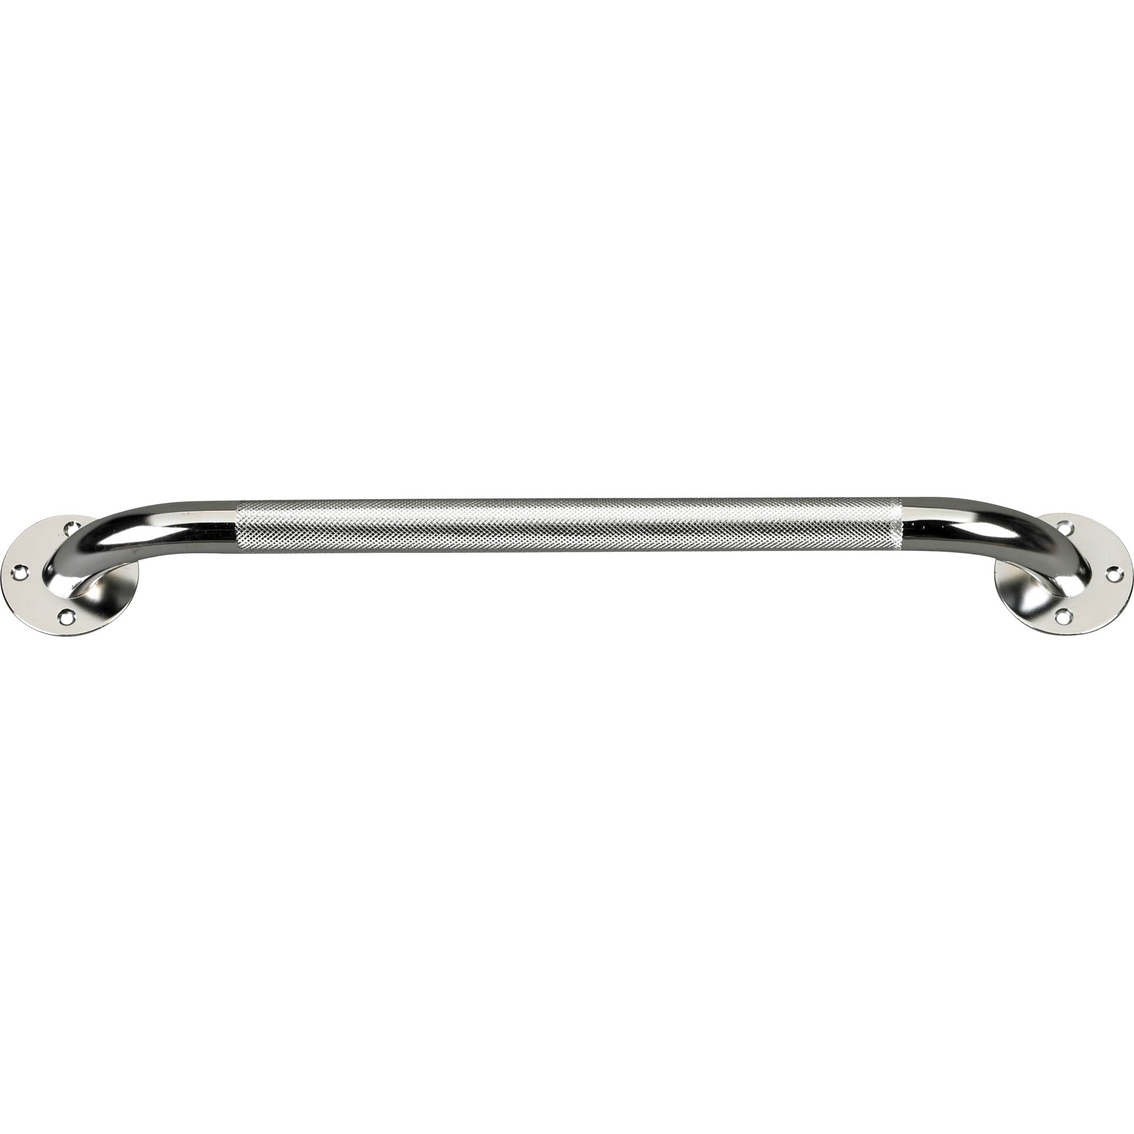 Drive Medical Chrome Knurled Grab Bar, 18 in. - Image 2 of 2